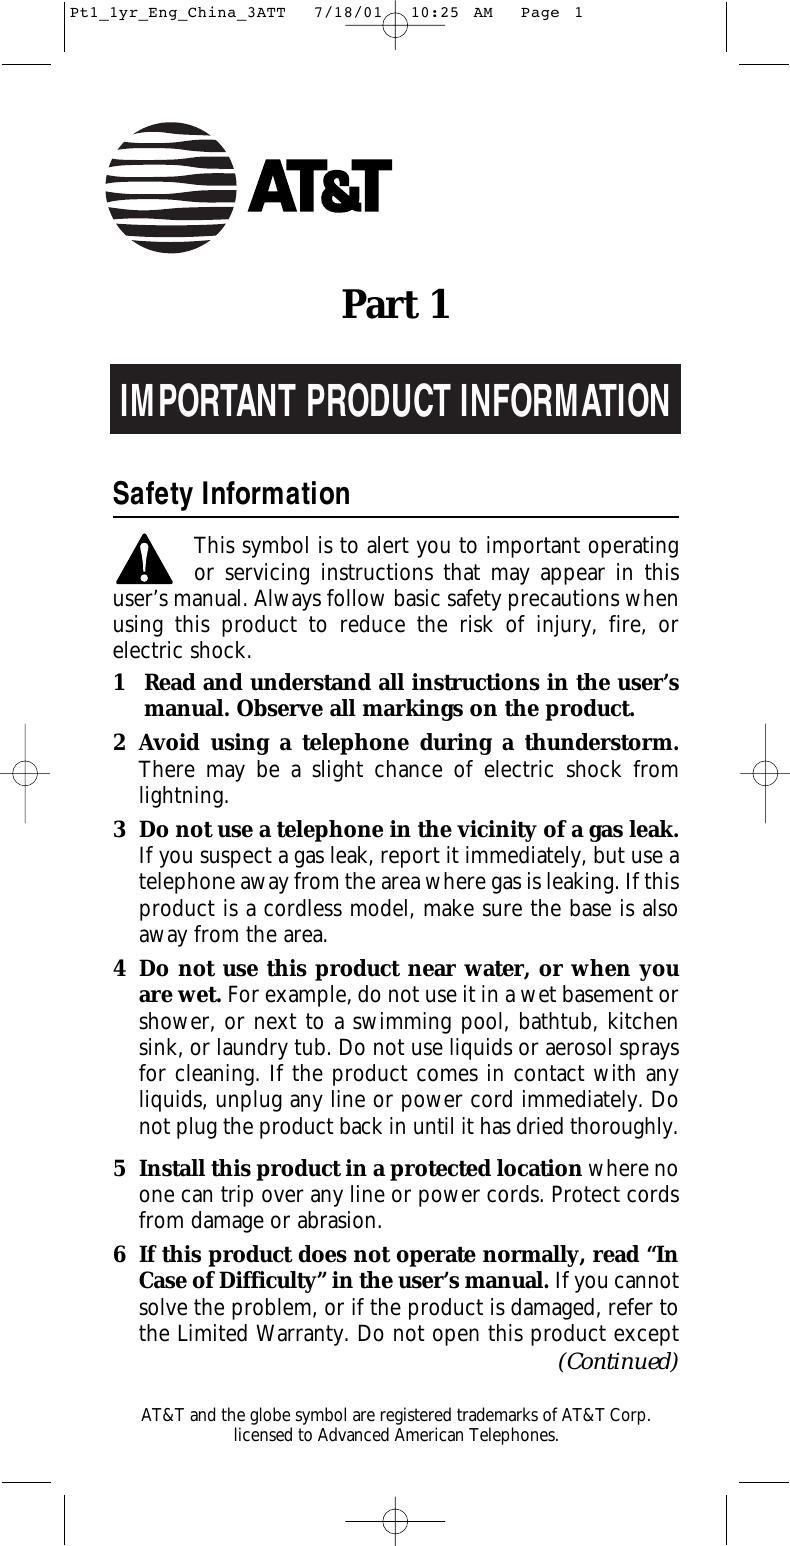 IMPORTANT PRODUCT INFORMATIONSafety InformationThis symbol is to alert you to important operating or servicing instructions that may appear in thisuser’s manual. Always follow basic safety precautions whenusing this product to reduce the risk of injury, fire, or electric shock.1 Read and understand all instructions in the user’s manual. Observe all markings on the product.2 Avoid using a telephone during a thunderstorm.There may be a slight chance of electric shock fromlightning.3 Do not use a telephone in the vicinity of a gas leak. If you suspect a gas leak, report it immediately, but use atelephone away from the area where gas is leaking. If thisproduct is a cordless model, make sure the base is alsoaway from the area.4 Do not use this product near water, or when youare wet. For example, do not use it in a wet basement orshower, or next to a swimming pool, bathtub, kitchensink, or laundry tub. Do not use liquids or aerosol spraysfor cleaning. If the product comes in contact with any liquids, unplug any line or power cord immediately. Donot plug the product back in until it has dried thoroughly.5 Install this product in a protected location where noone can trip over any line or power cords. Protect cordsfrom damage or abrasion.6 If this product does not operate normally, read “InCase of Difficulty” in the user’s manual. If you cannotsolve the problem, or if the product is damaged, refer tothe Limited Warranty. Do not open this product exceptPart 1(Continued)AT&amp;T and the globe symbol are registered trademarks of AT&amp;T Corp.licensed to Advanced American Telephones.Pt1_1yr_Eng_China_3ATT  7/18/01  10:25 AM  Page 1